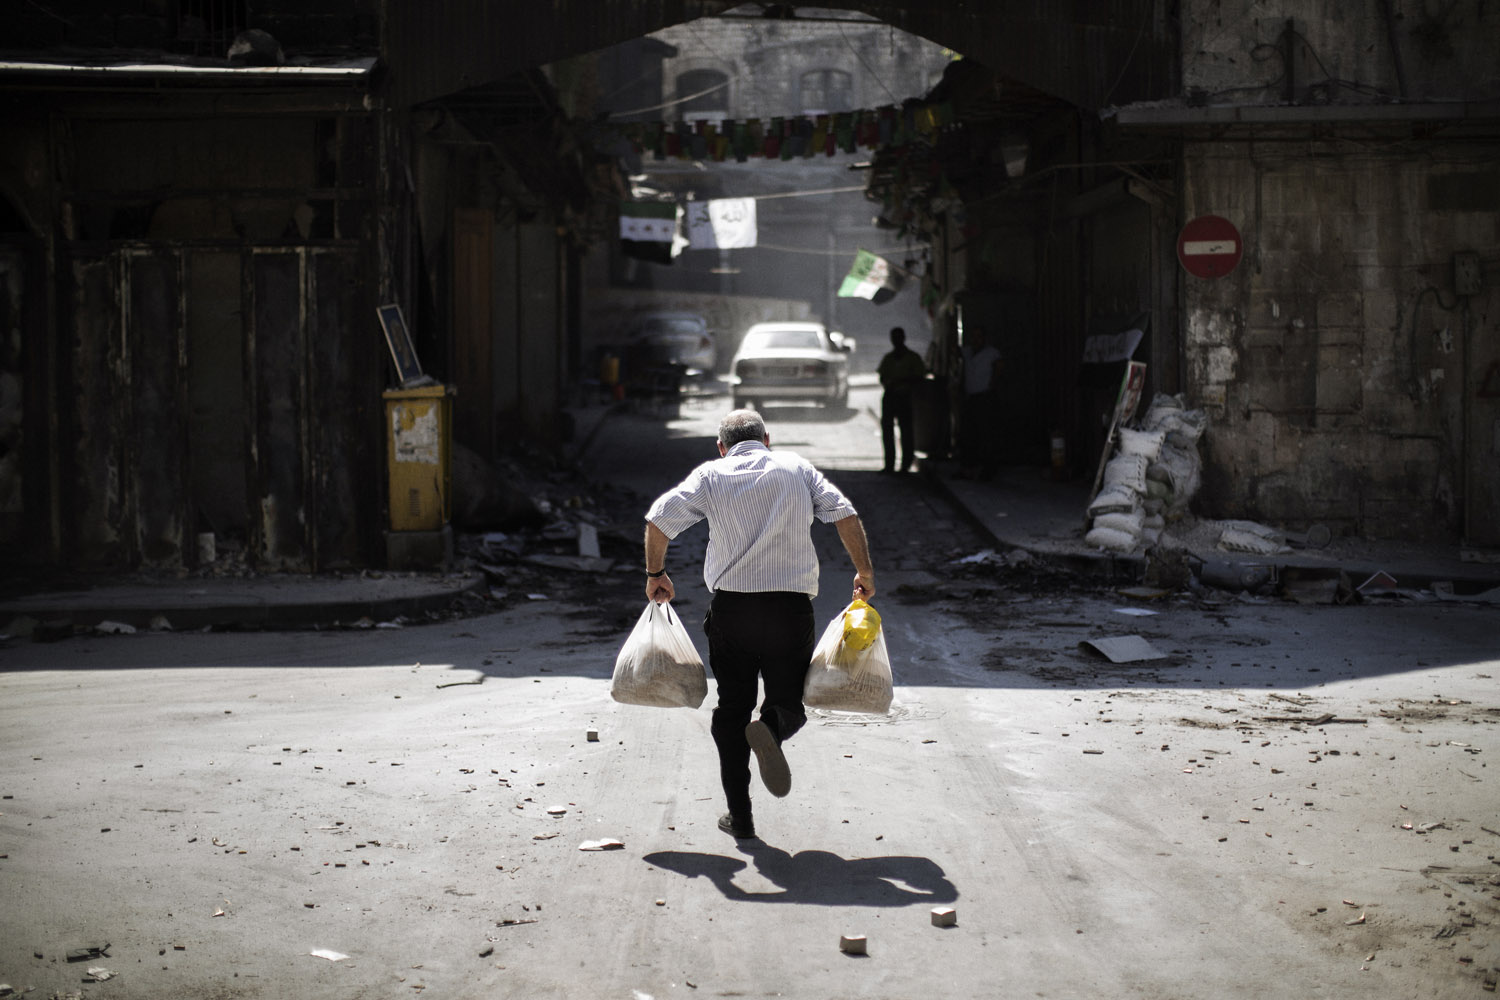 Sept. 14, 2012. A Syrian man carrying grocery bags tries to dodge sniper fire as he runs through an alley near a checkpoint manned by the Free Syria Army in Aleppo, Syria.